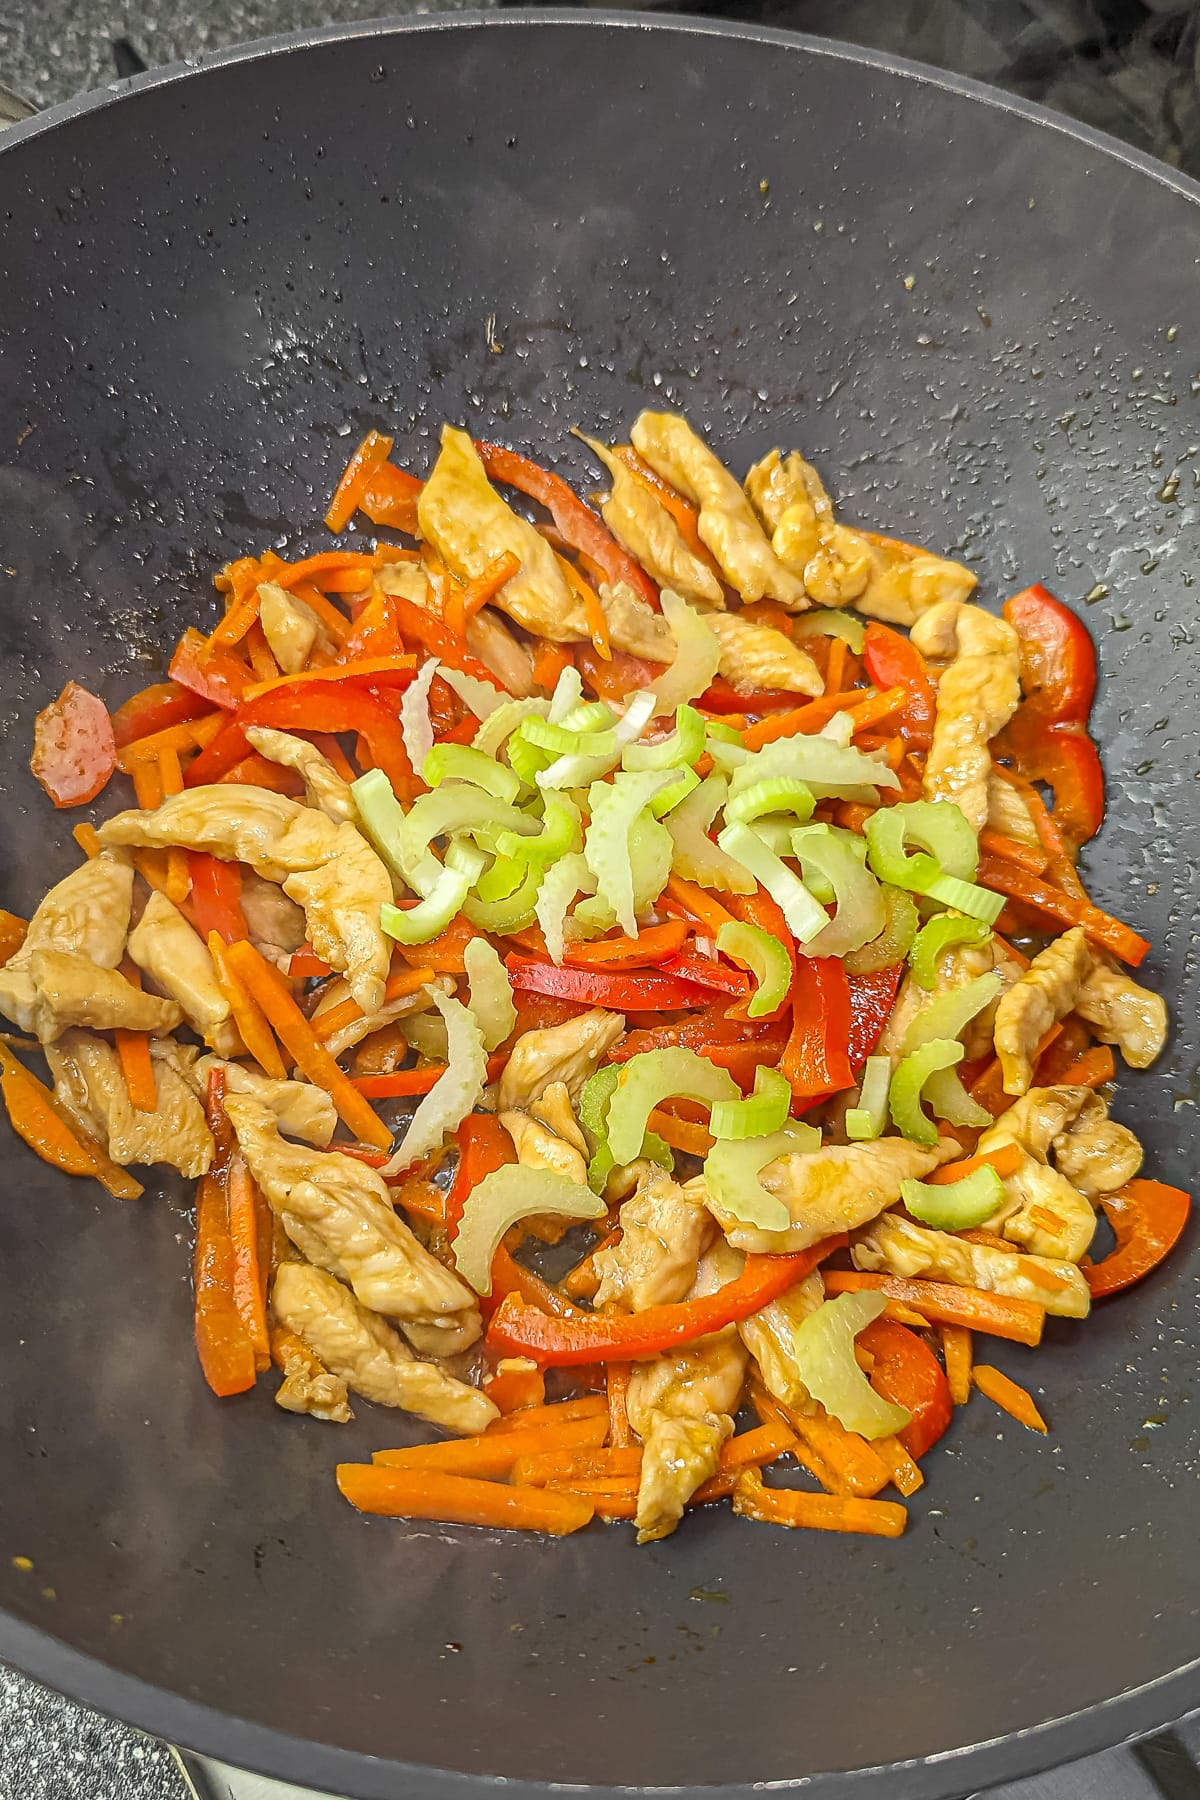 Stir-fry with chicken, red bell pepper, carrots, and celery in a pan.